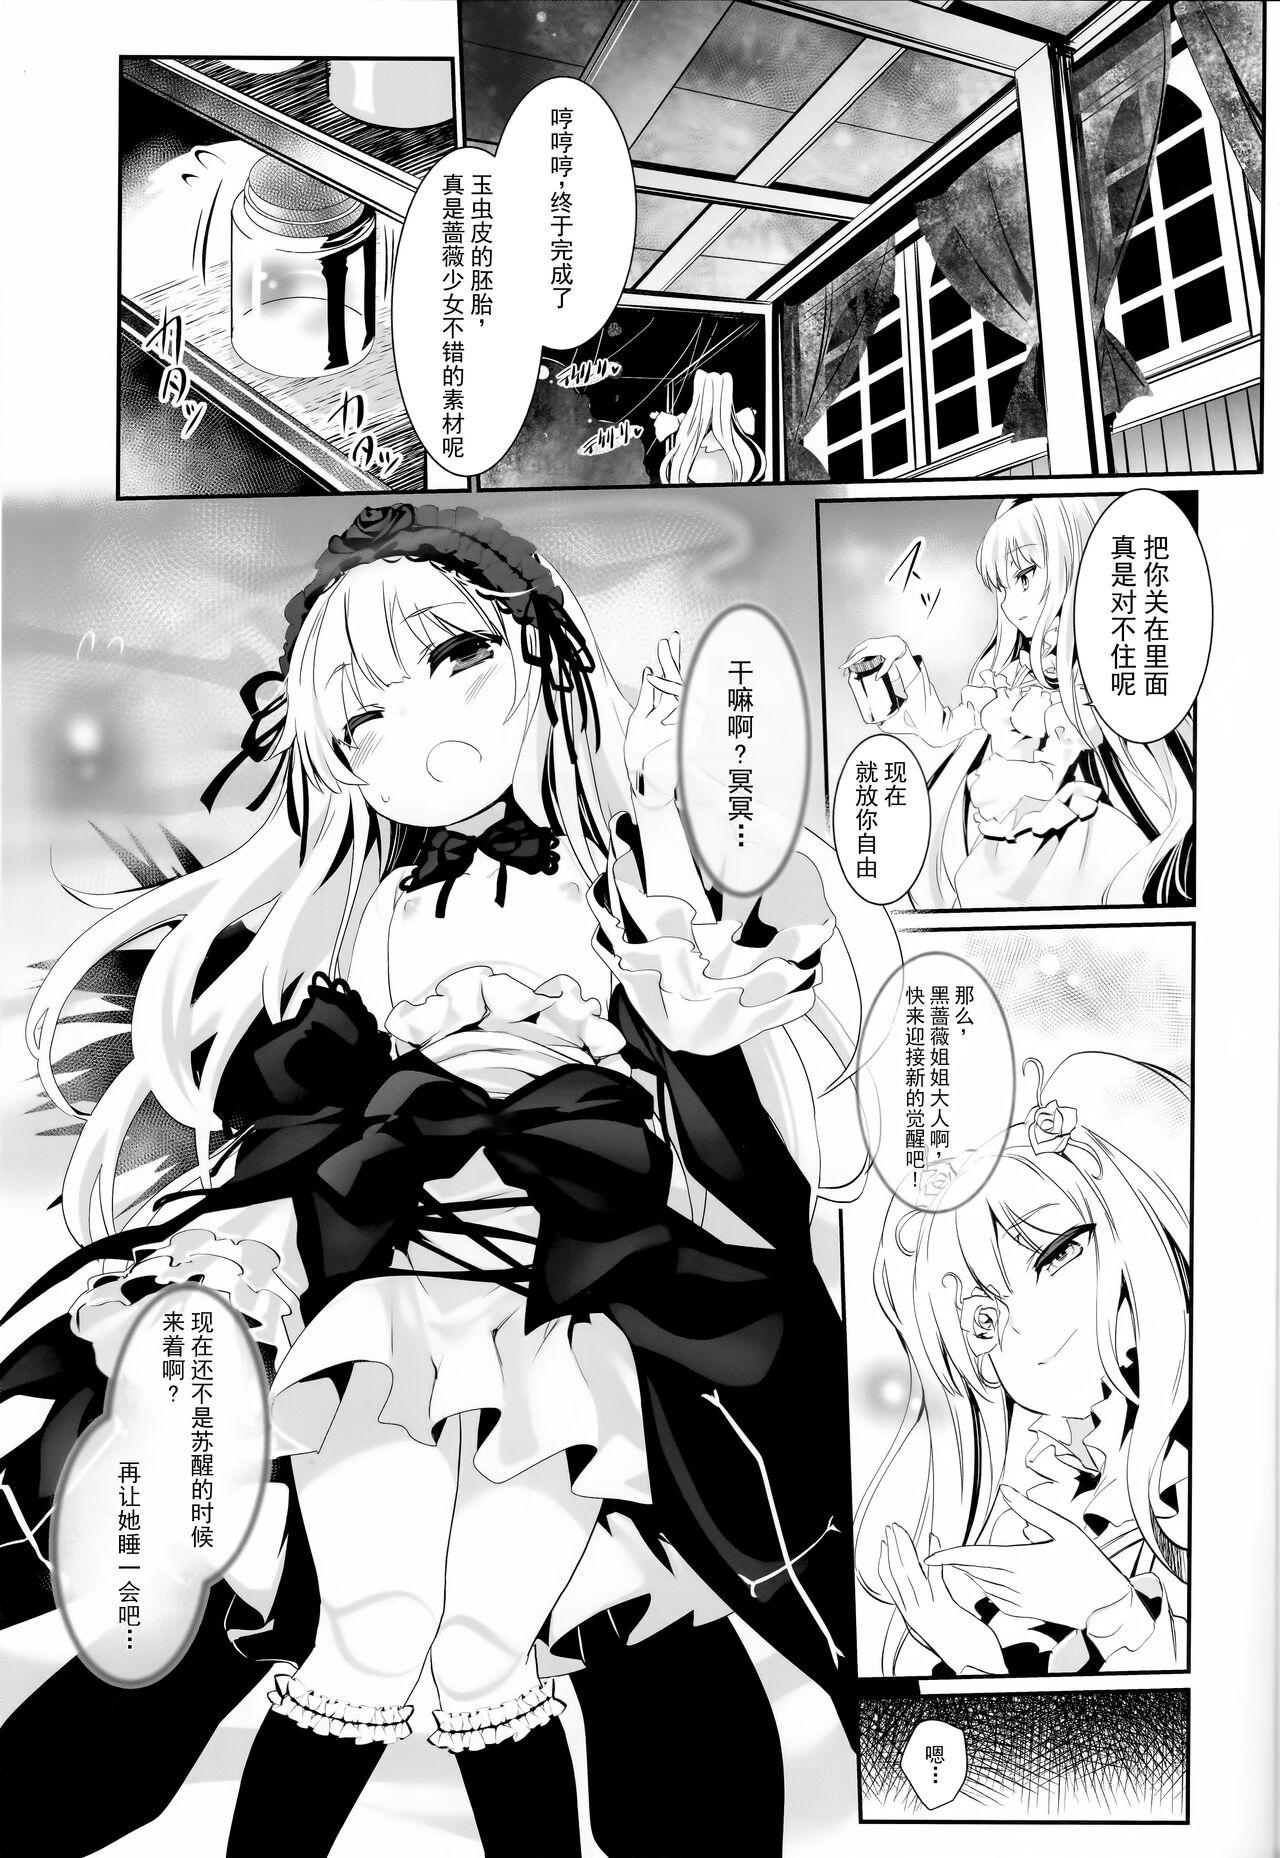 Lezbi Glamour Growth - Rozen maiden Family Taboo - Page 2